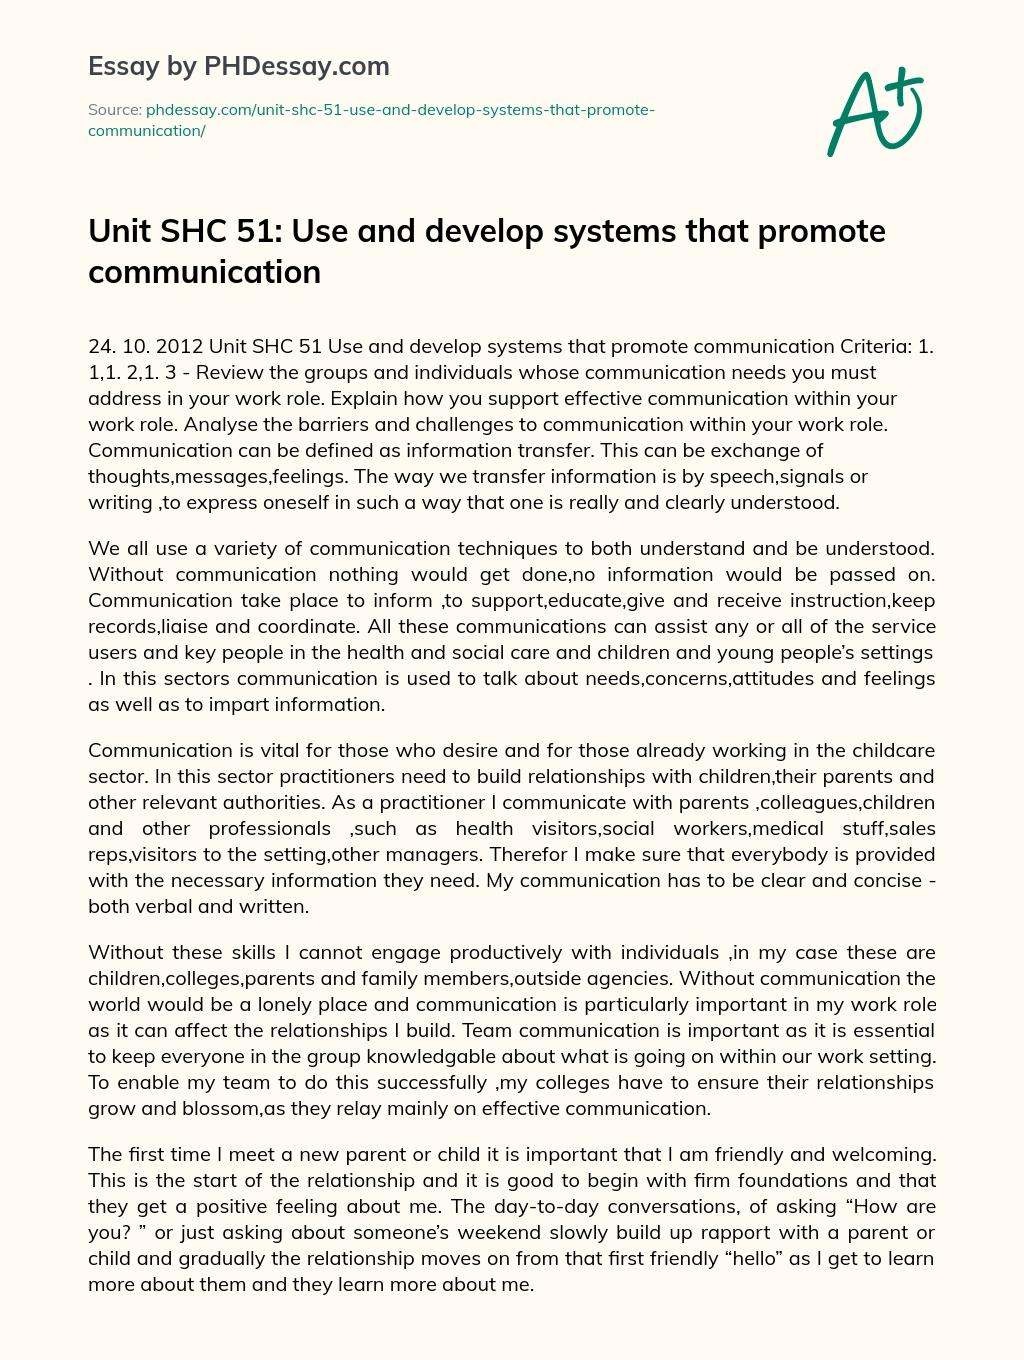 Unit SHC 51: Use and develop systems that promote communication essay